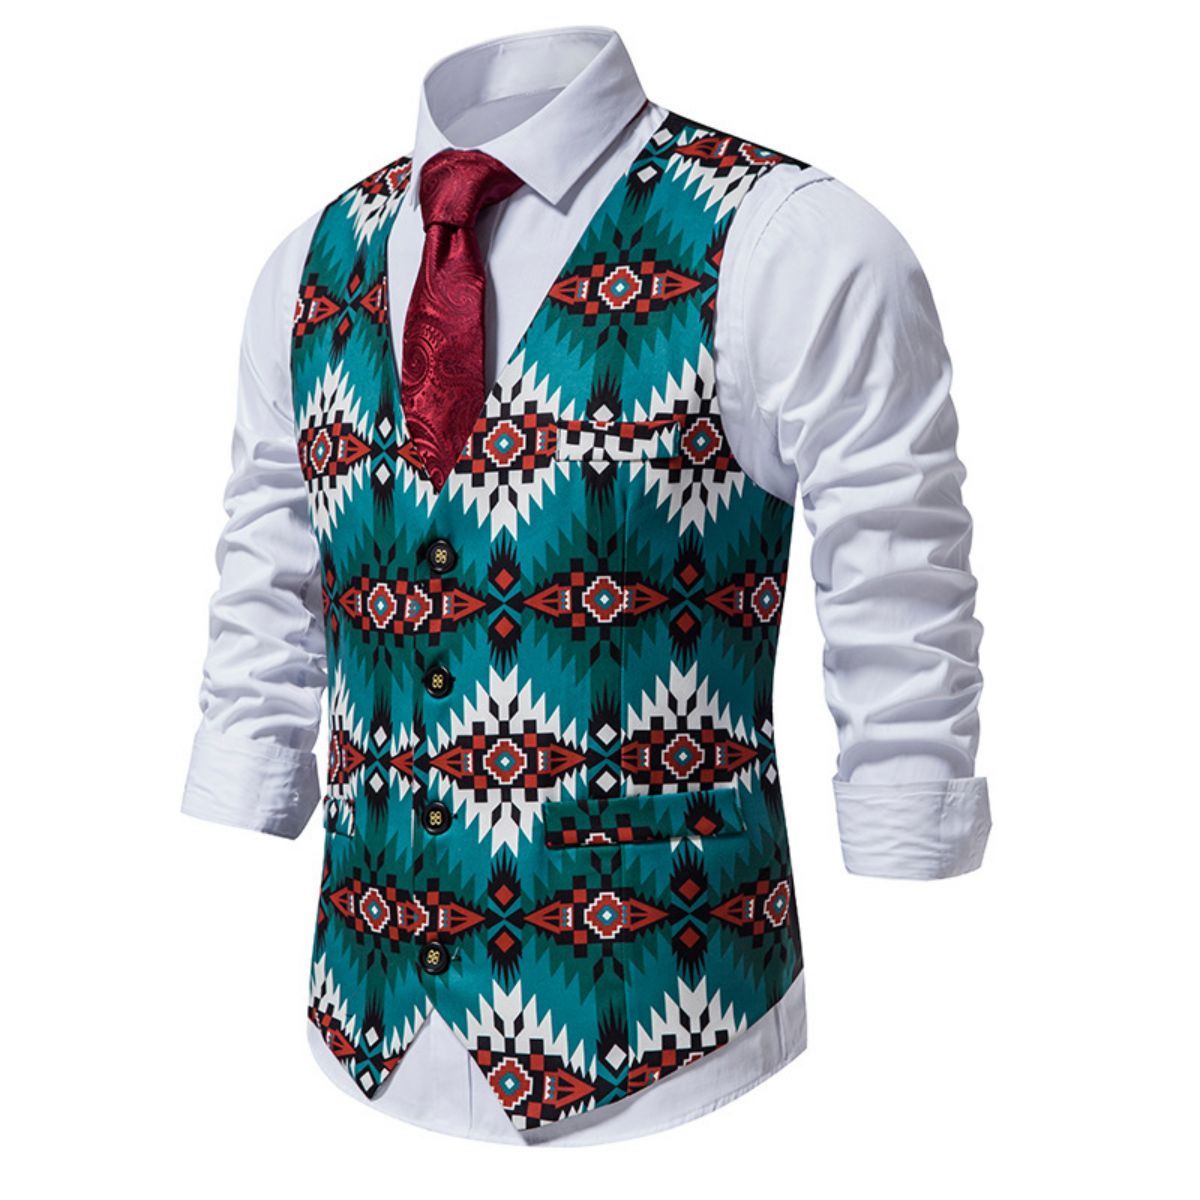 Men's Floral Print Suit Vest 4 Bottom V-neck Casual Waistcoat for Wedding Party Prom Dinner Performance